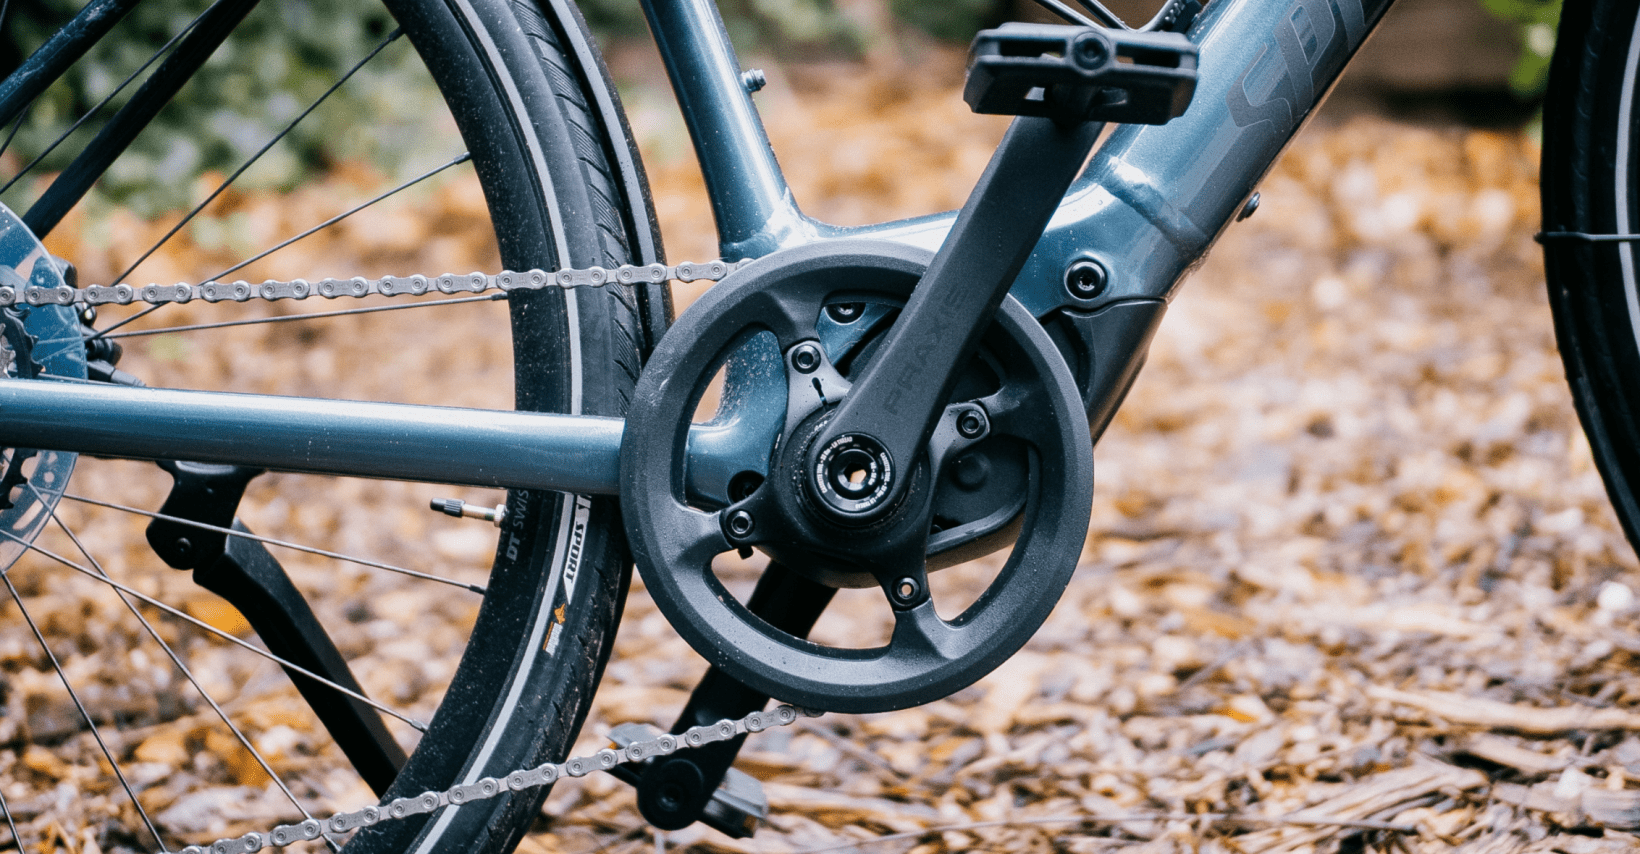 Buying an ebike? You should know about 'torque' and 'cadence' sensors